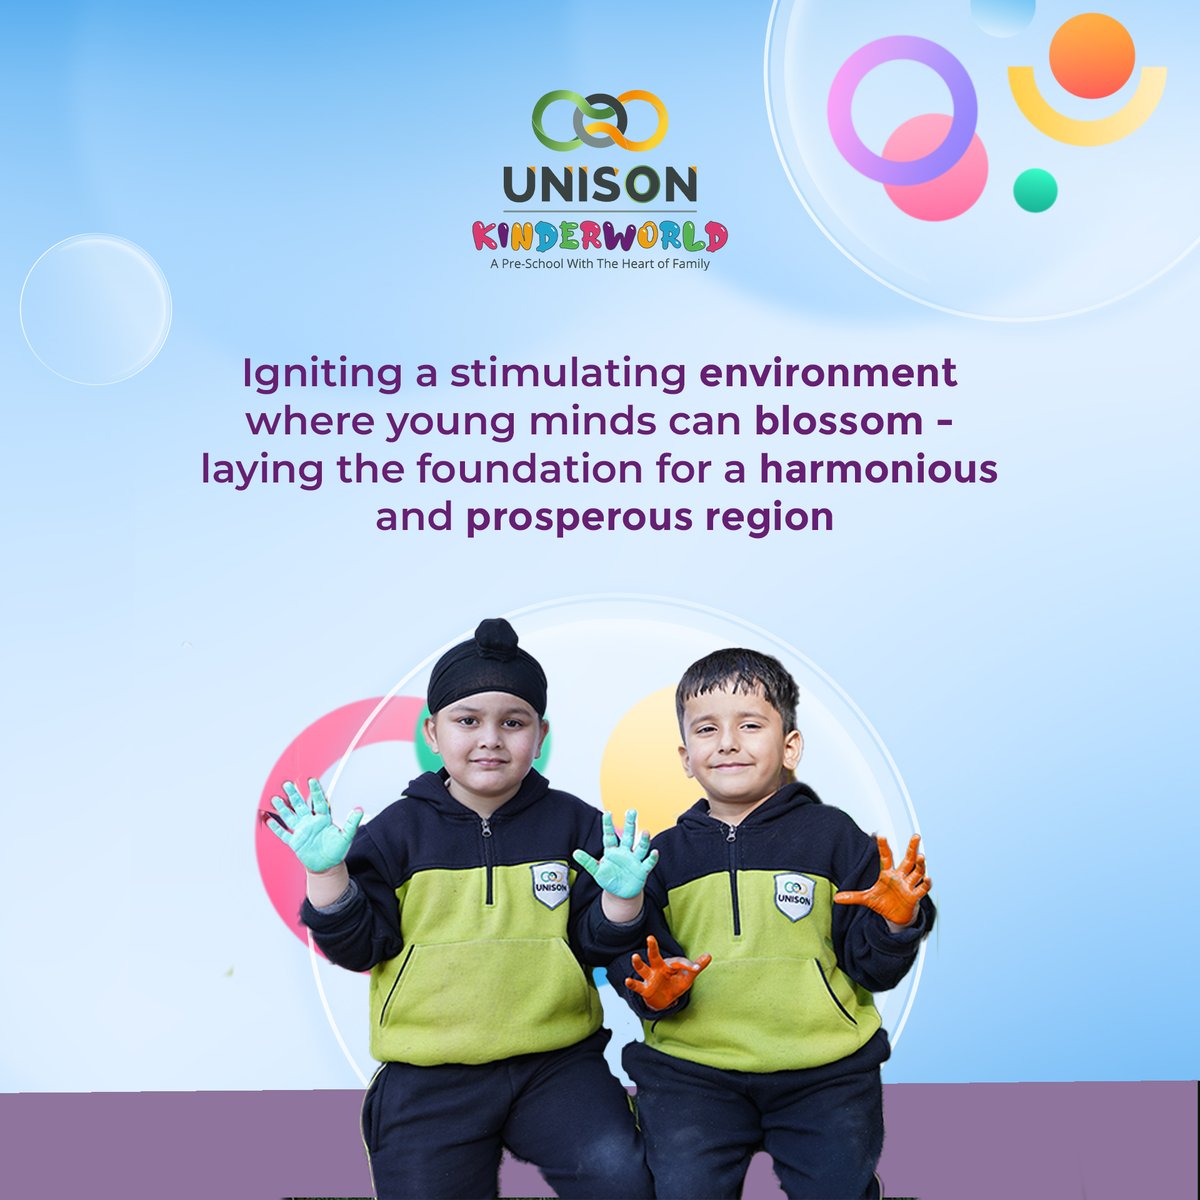 Laying the foundation for a harmonious and prosperous region, where we empower our students with an exceptional education that emphasises creativity, empathy and global awareness💡

#NurturingYoungMinds #UnisonKinderWorld #CBSESchool #HolisticDevelopment #LearningIsFun